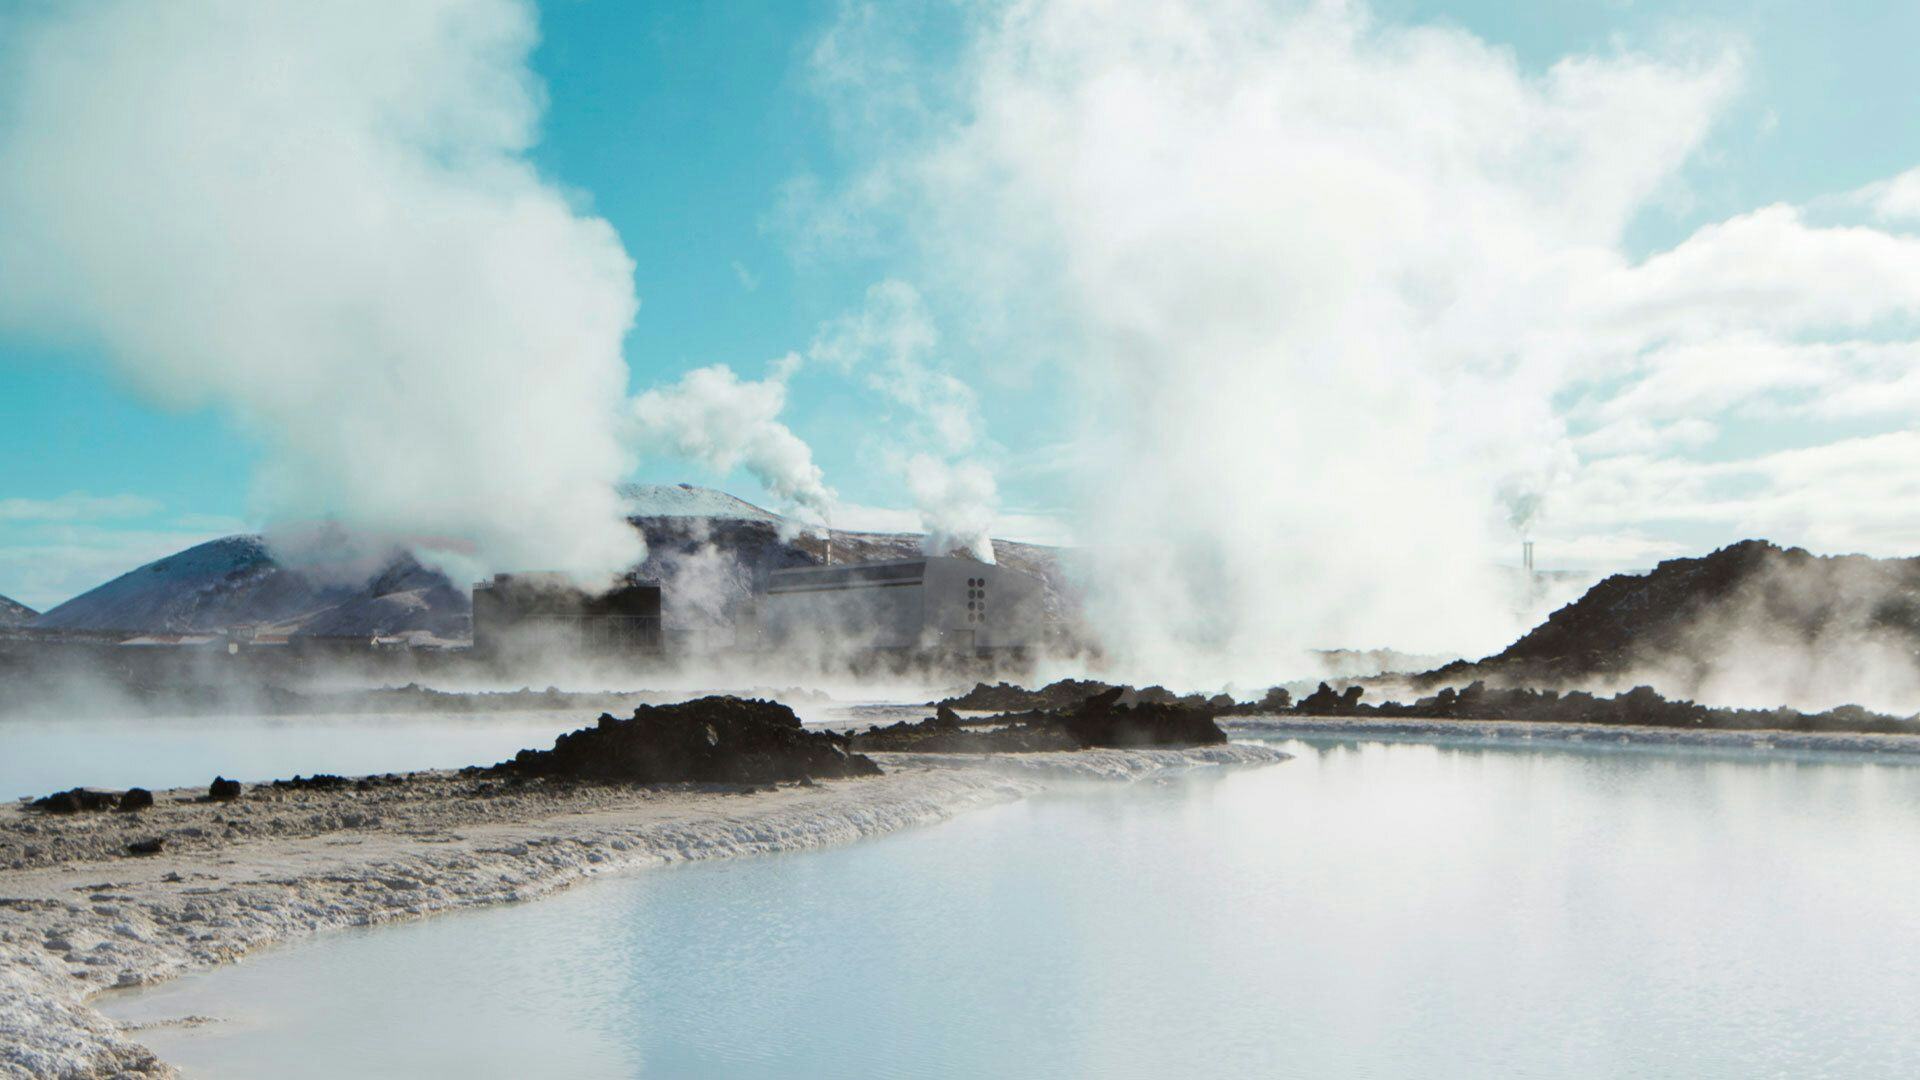 A geothermal area with steam rising from the ground